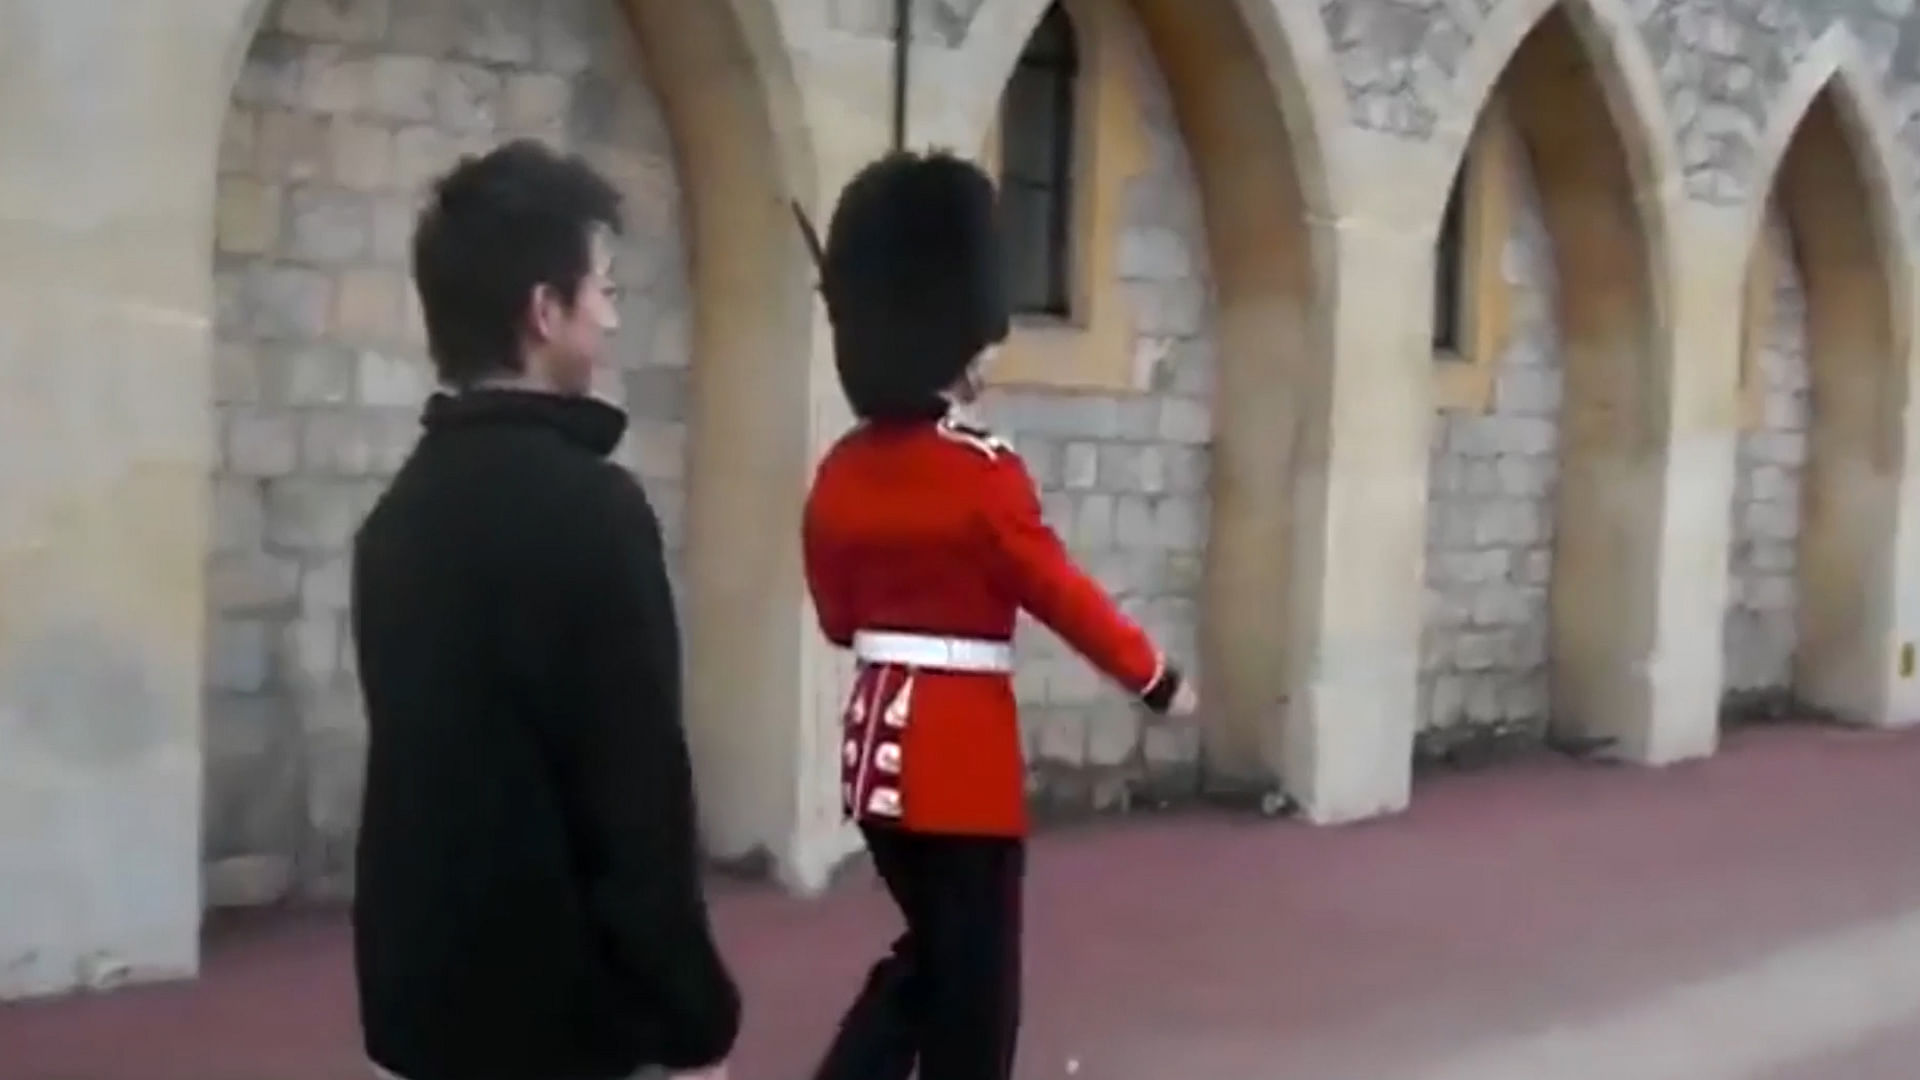 The dramatic moment when a Queen’s Guard pulled his rifle on a tourist after he touches the guard on the shoulder. (AP video hub)